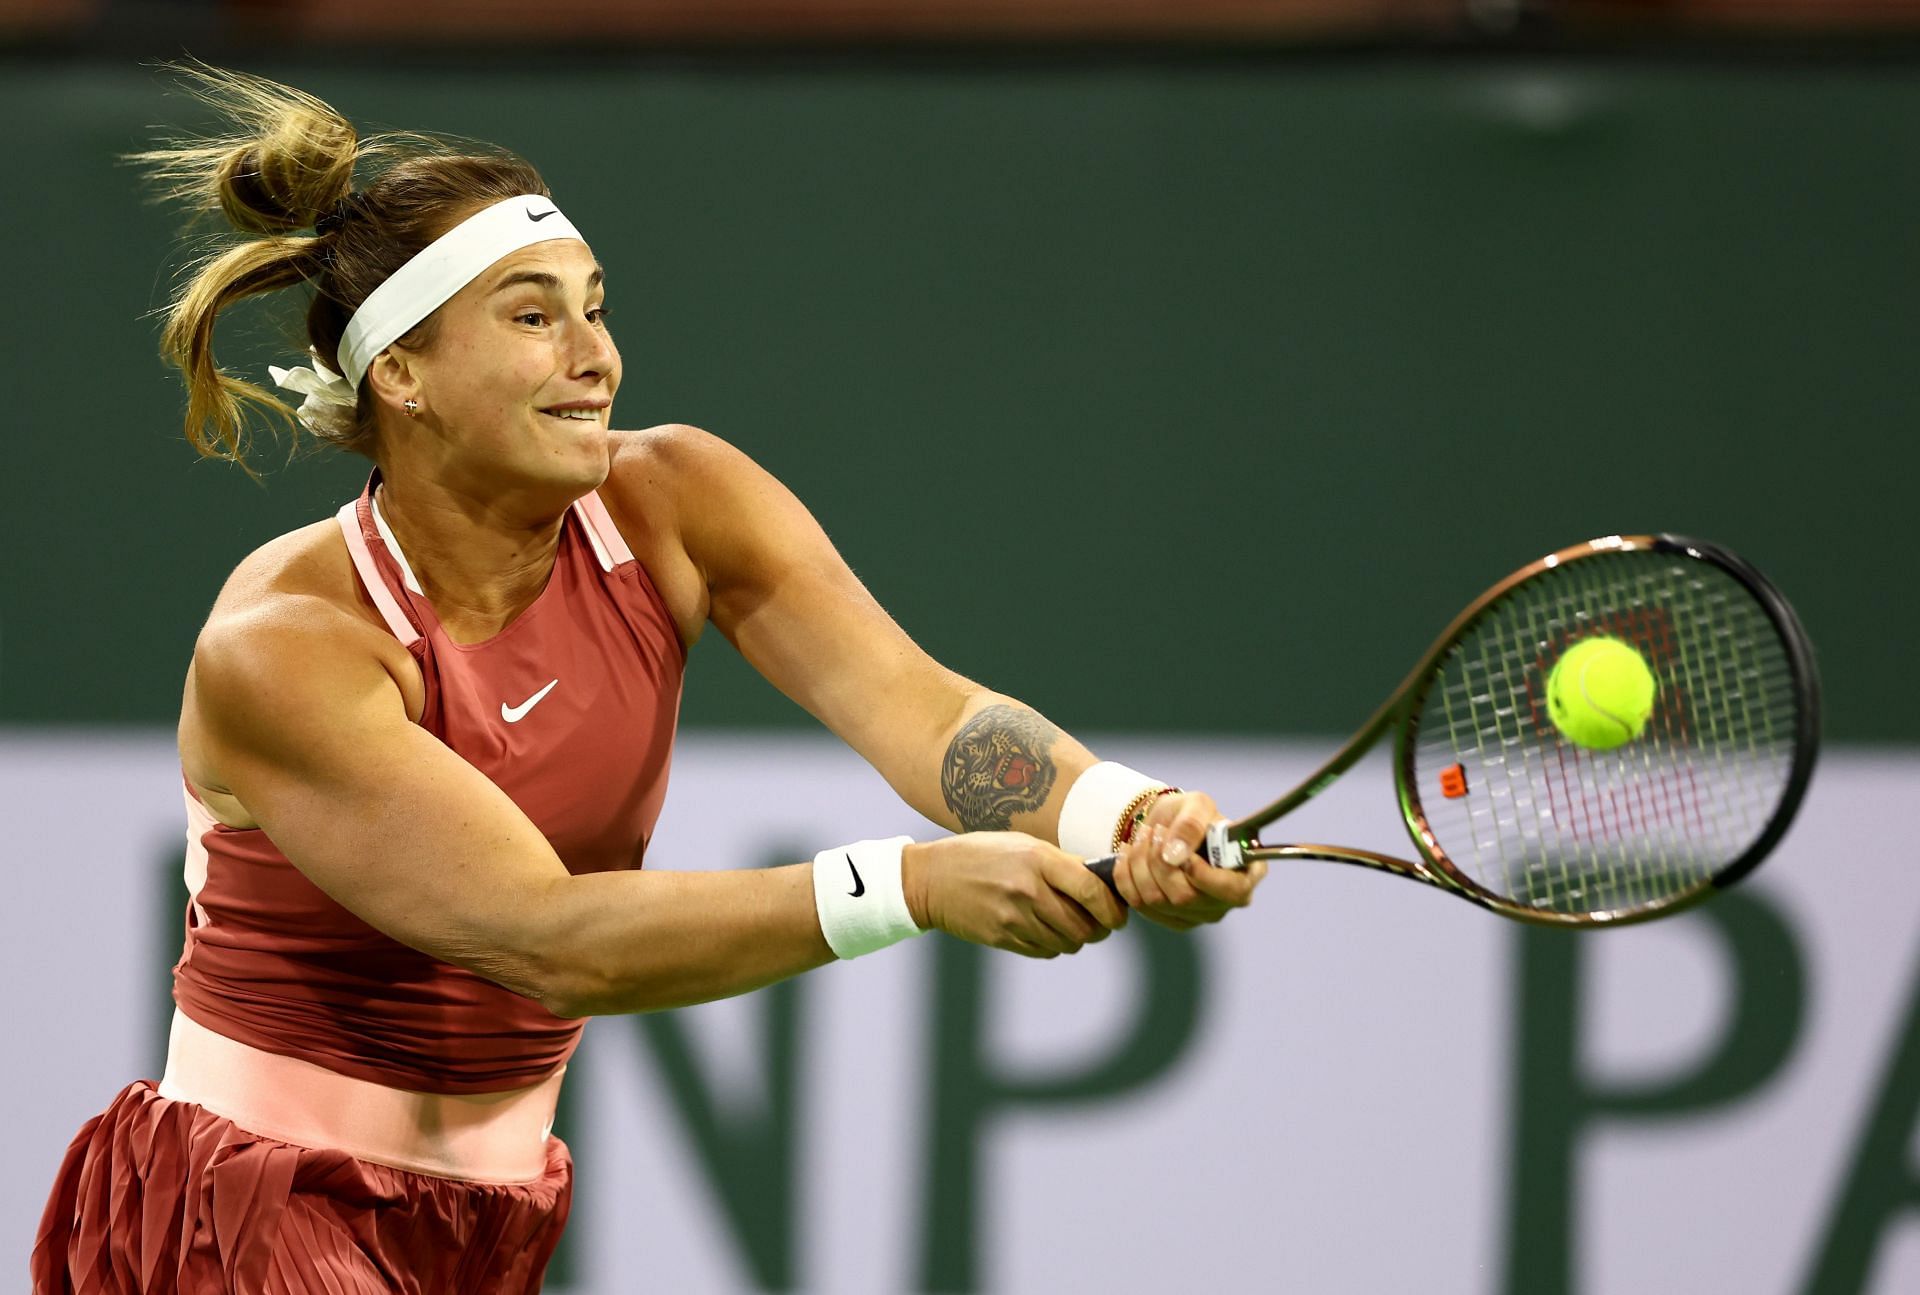 World No. 3 Aryna Sabalenka is the highest-ranked player in the draw at BNP Paribas Open